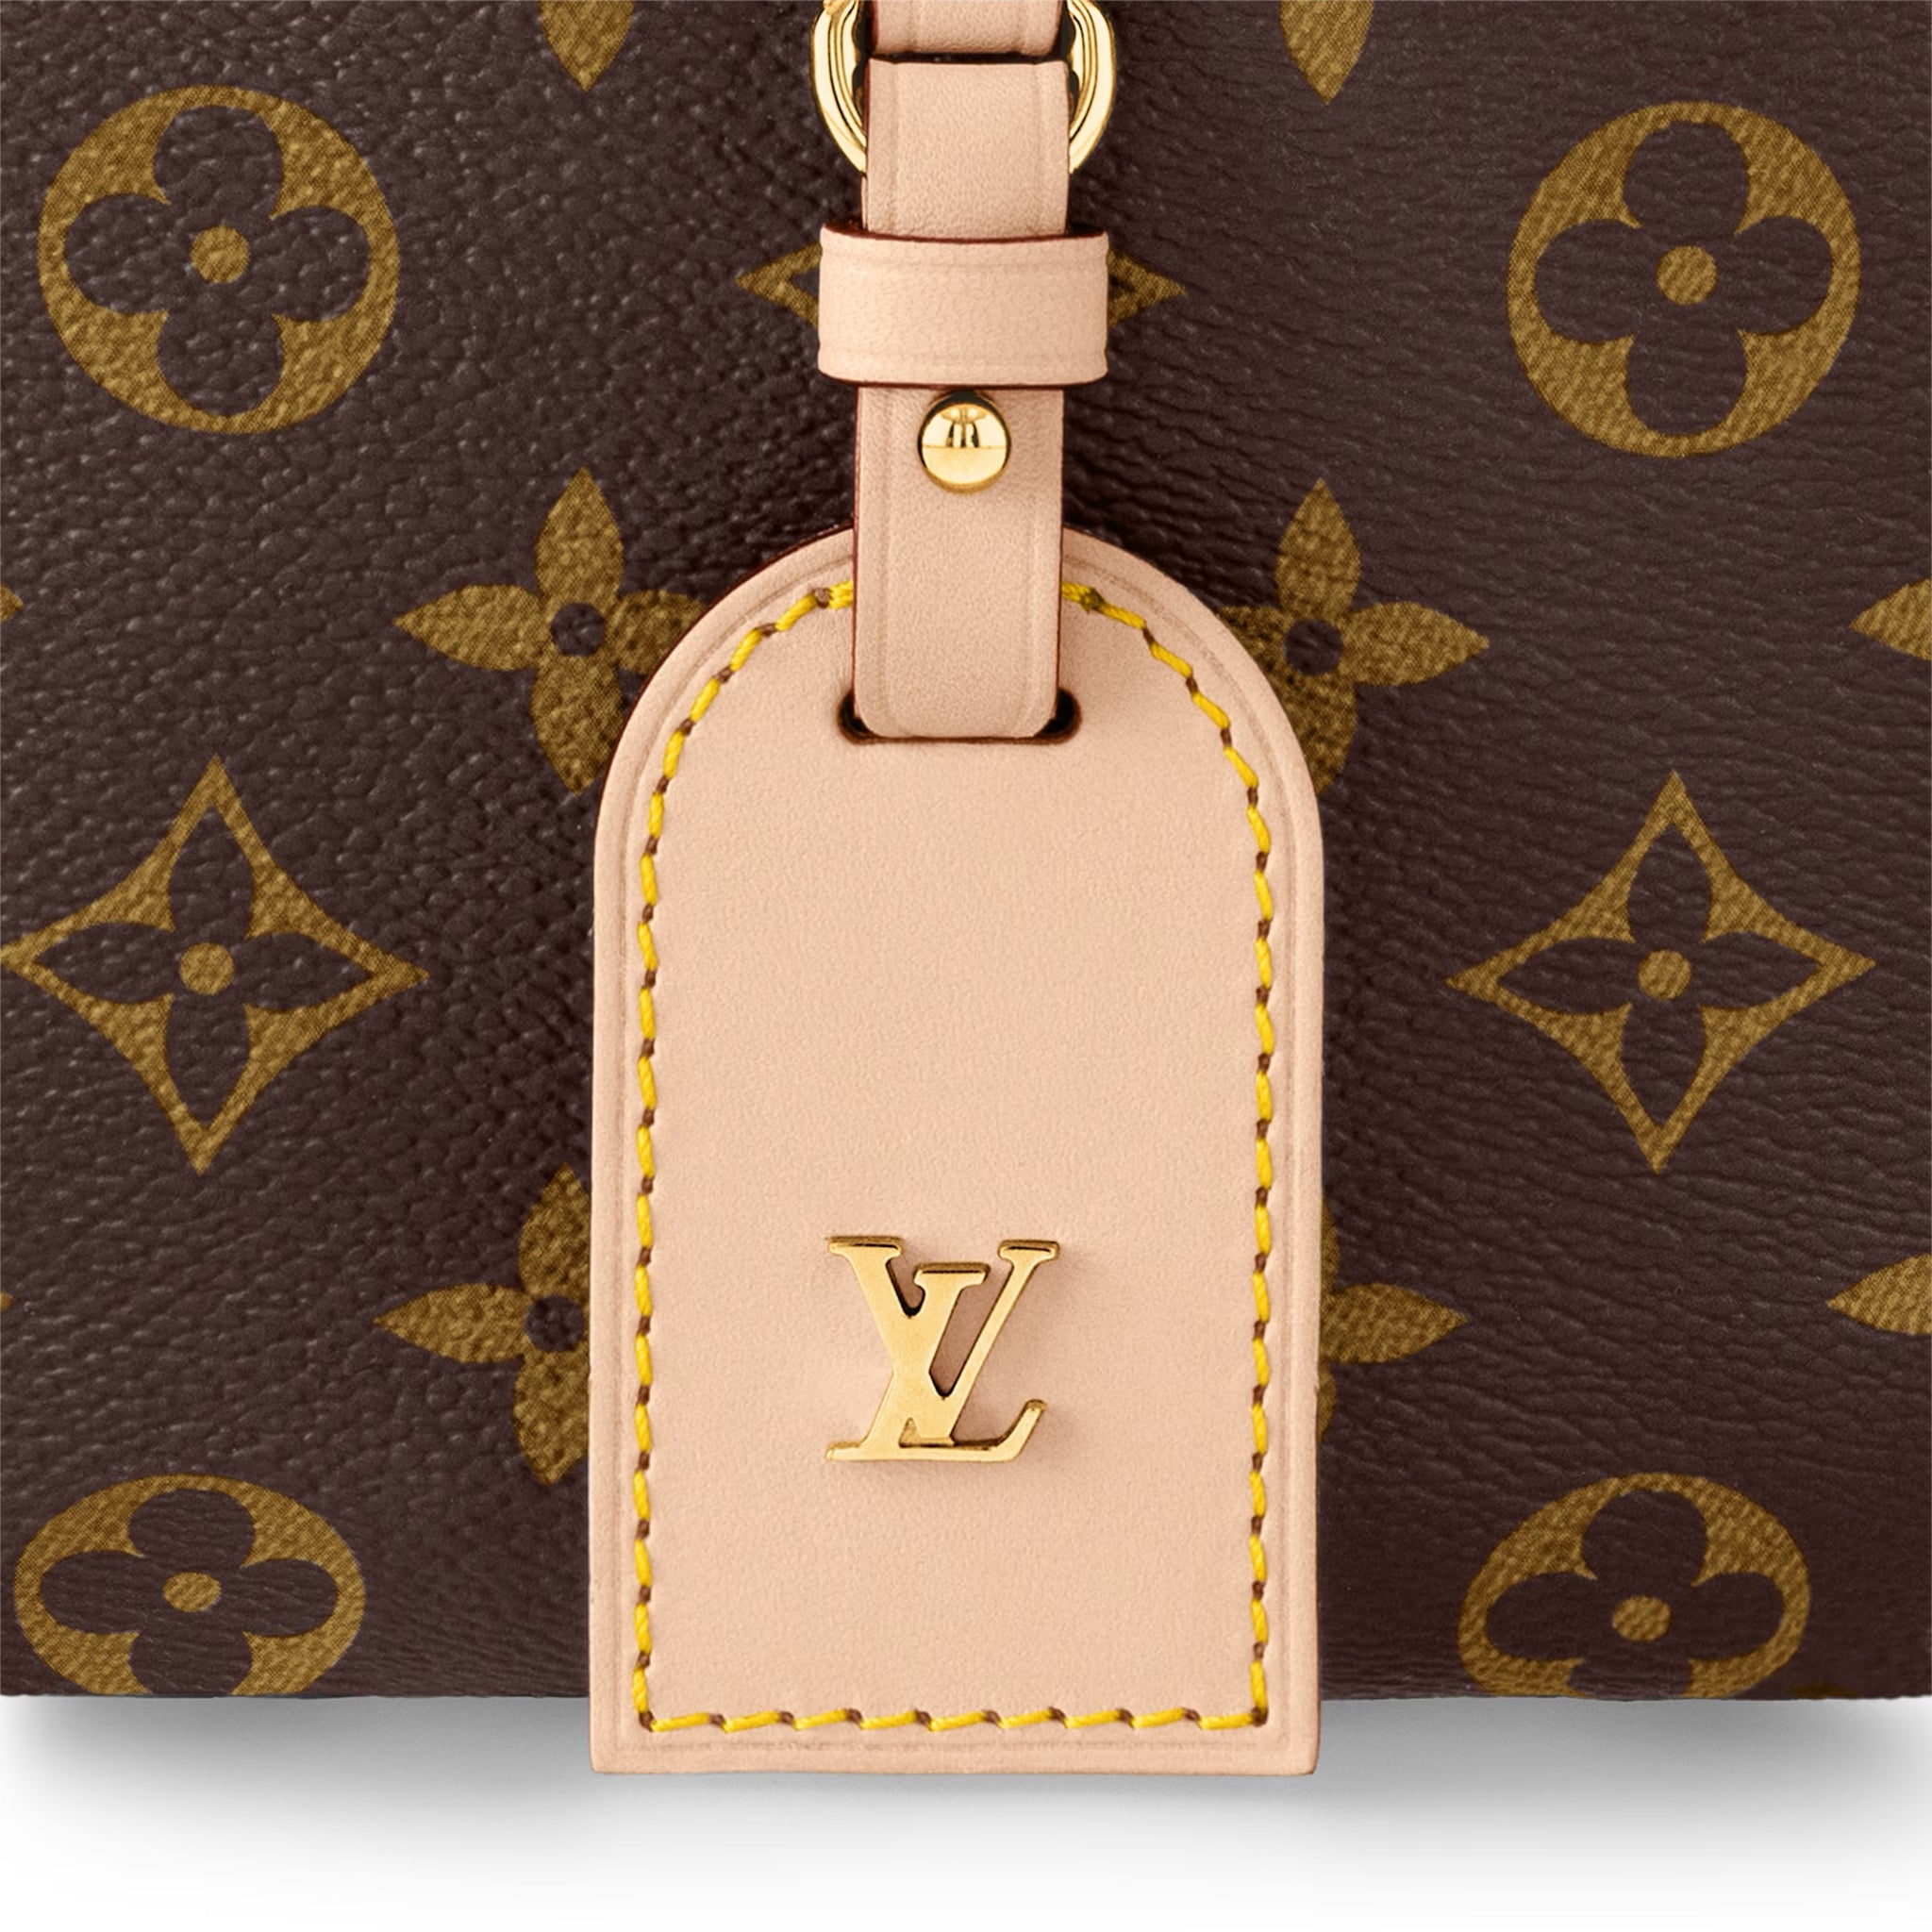 Louis vuitton high rise bumbag with chain｜TikTok Search